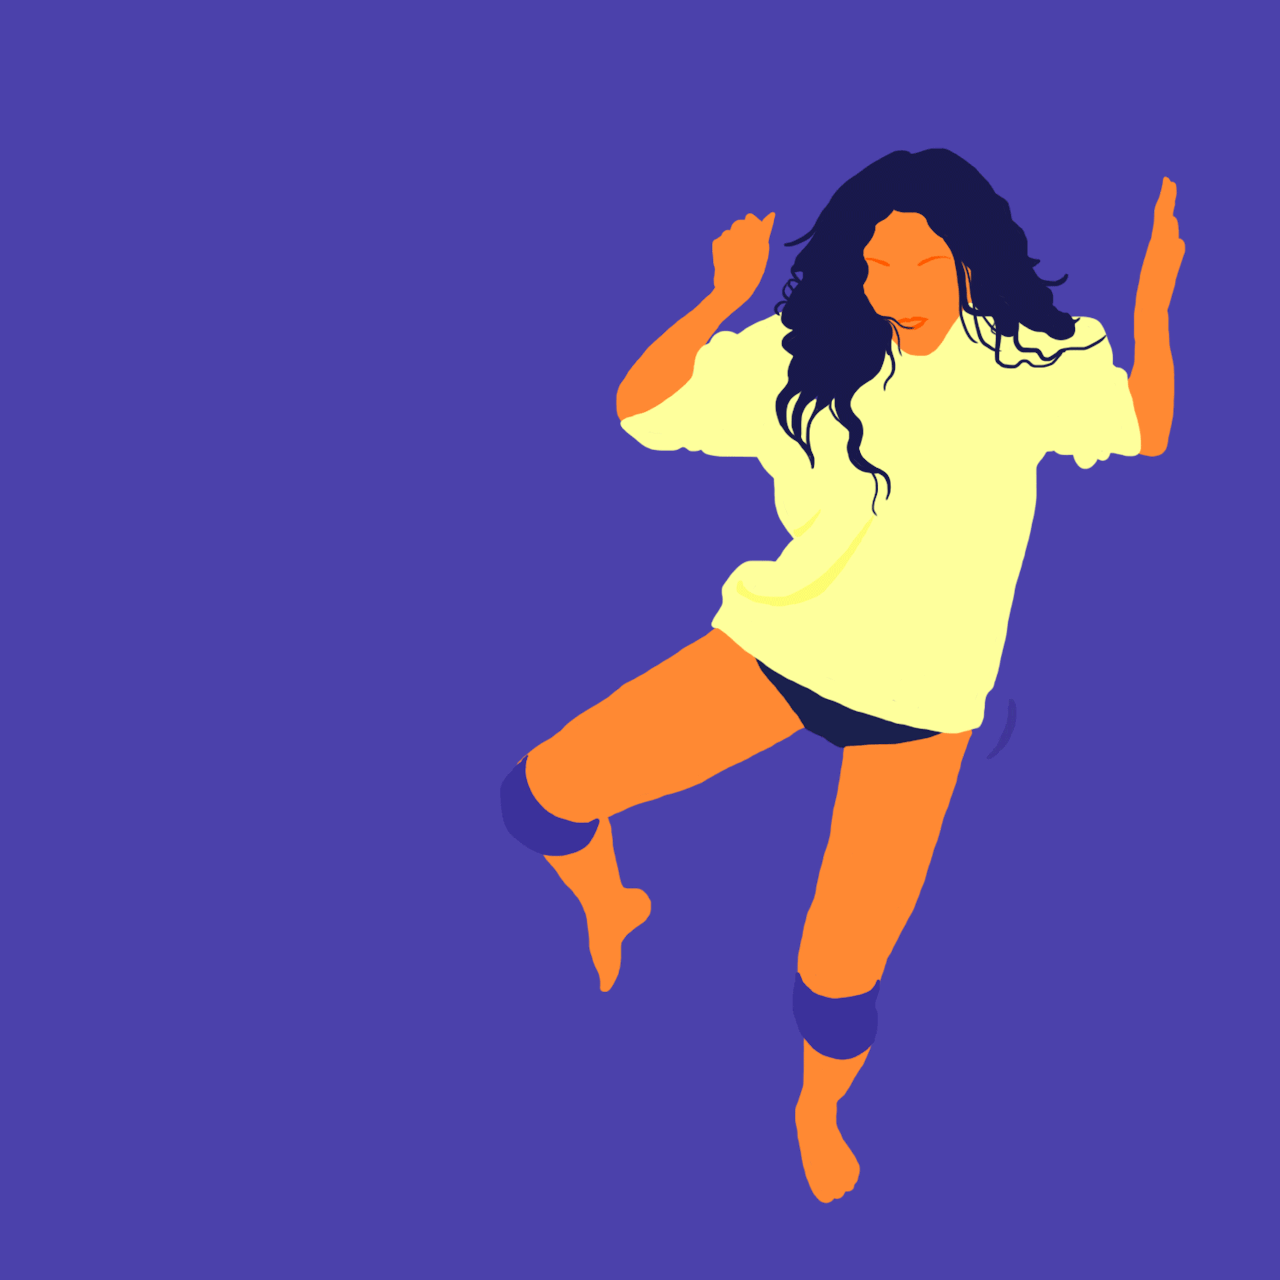 A GIF of a woman dancing with only her right leg